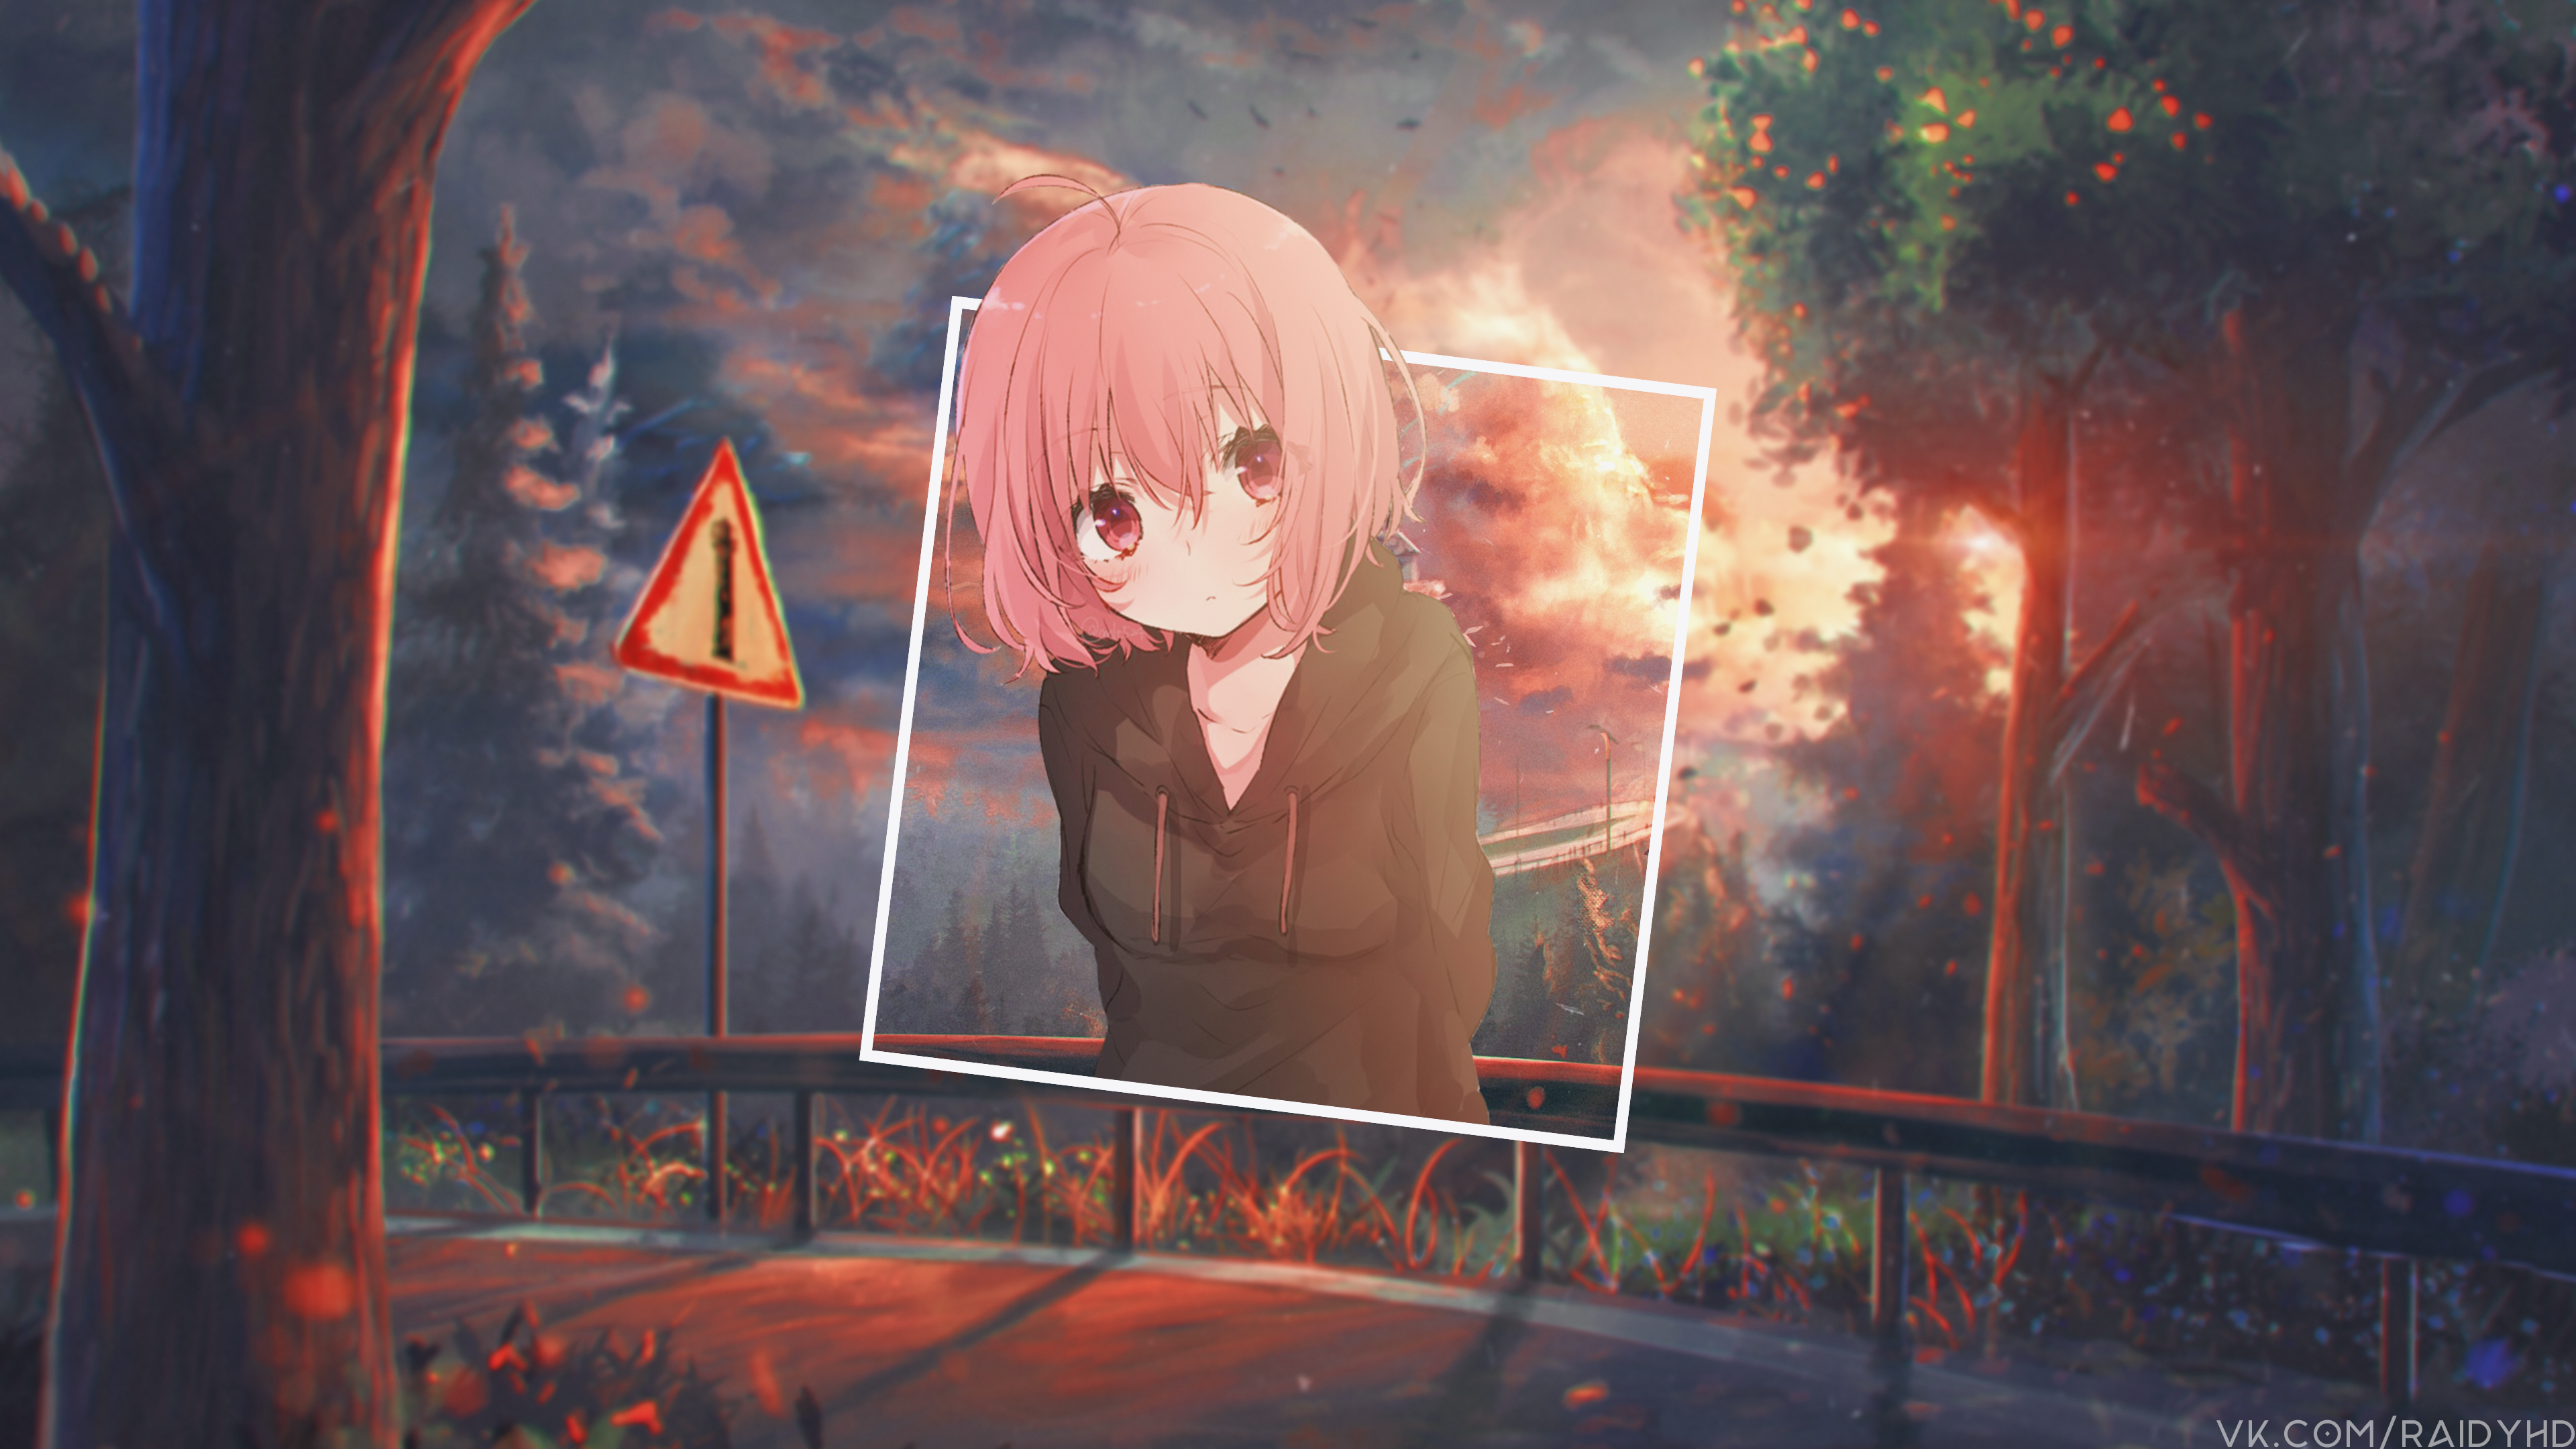 Anime 3840x2160 anime anime girls picture-in-picture